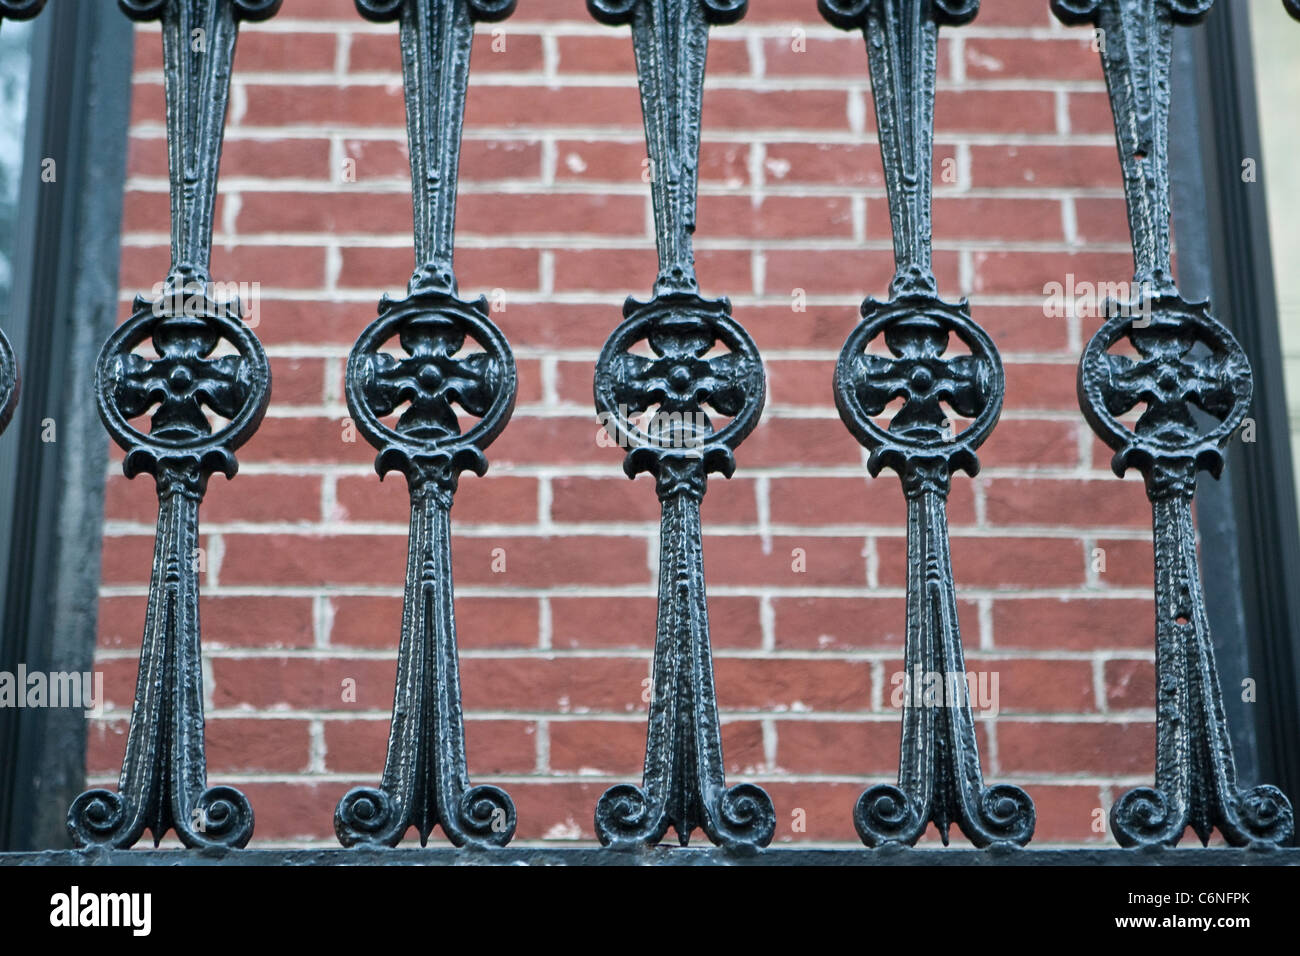 1870 victorian ironwork detail are shown on a Brooklyn Heights railings in Brooklyn, NY, Monday August 1, 2011. Stock Photo